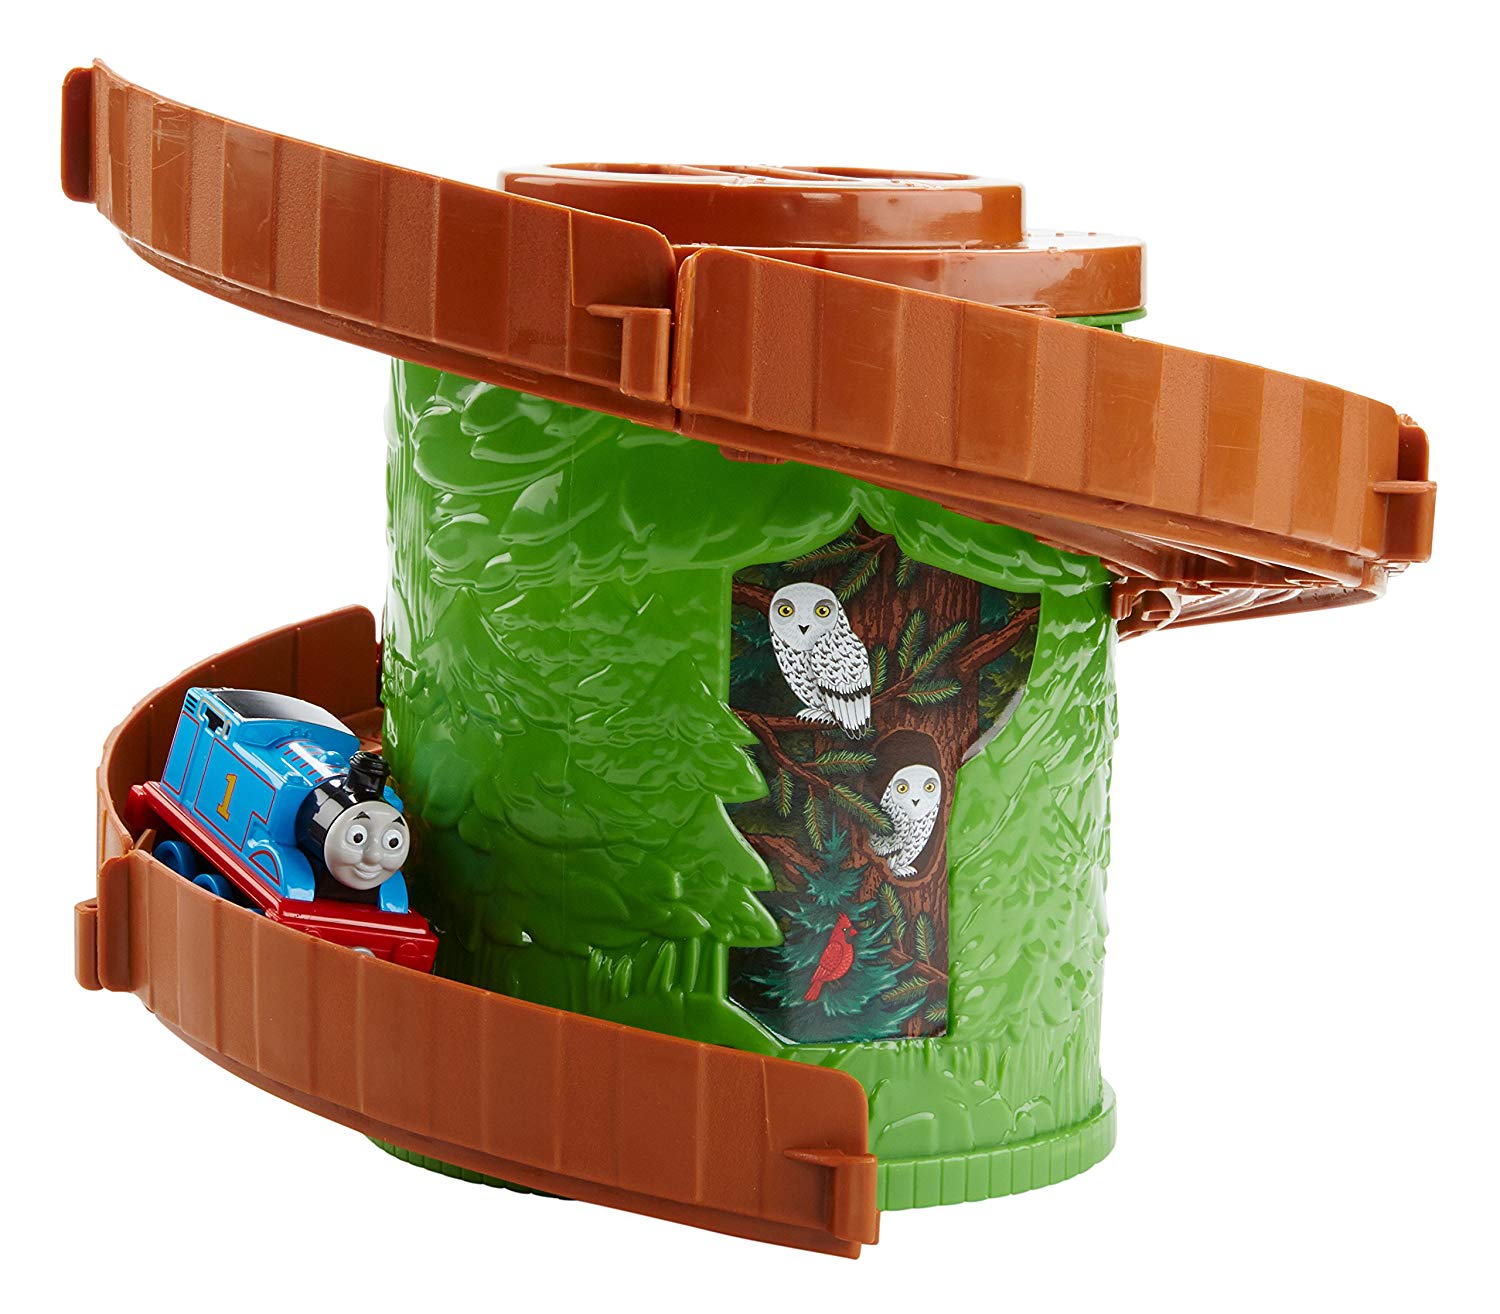 Fisher-Price Thomas The Train Adventures Spiral Tower Tracks with Thomas